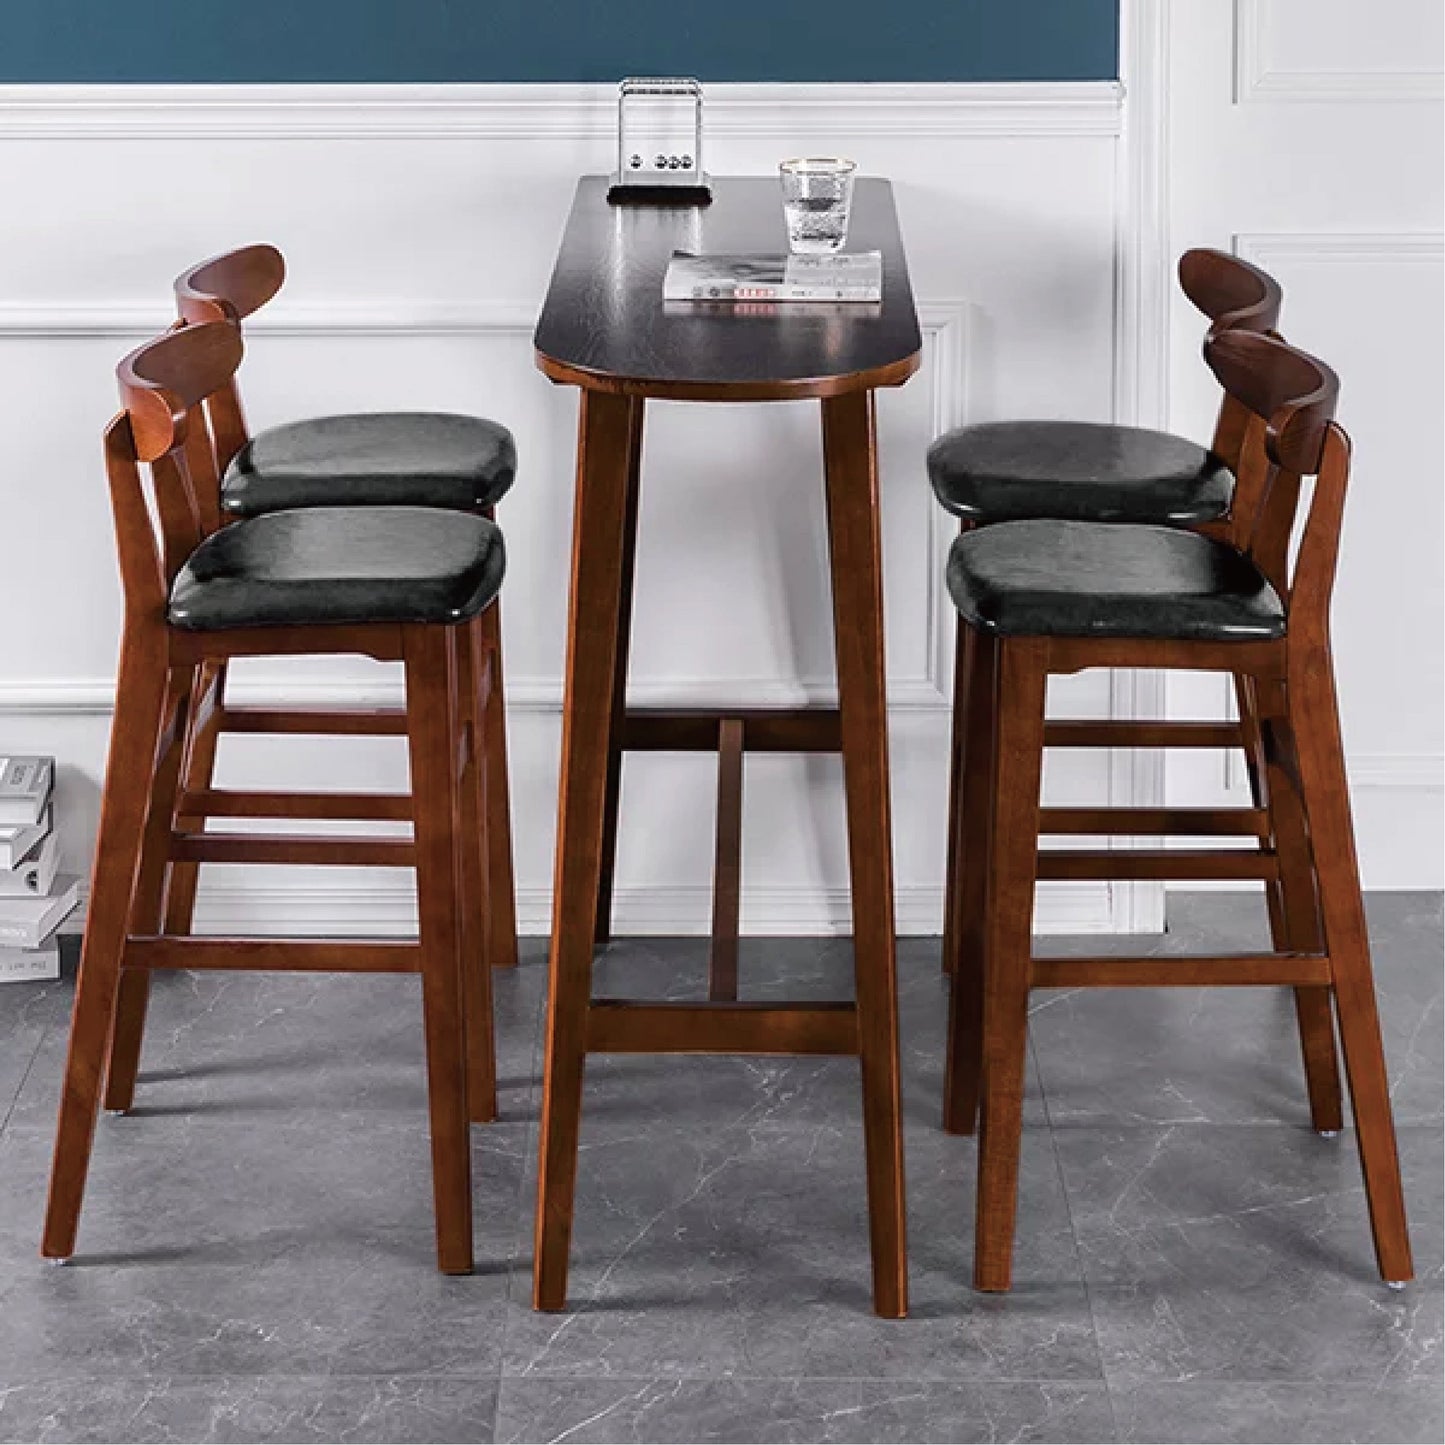 Chopin Bar Stool Solid Wood Bar Stools (Set of Two) | Customized